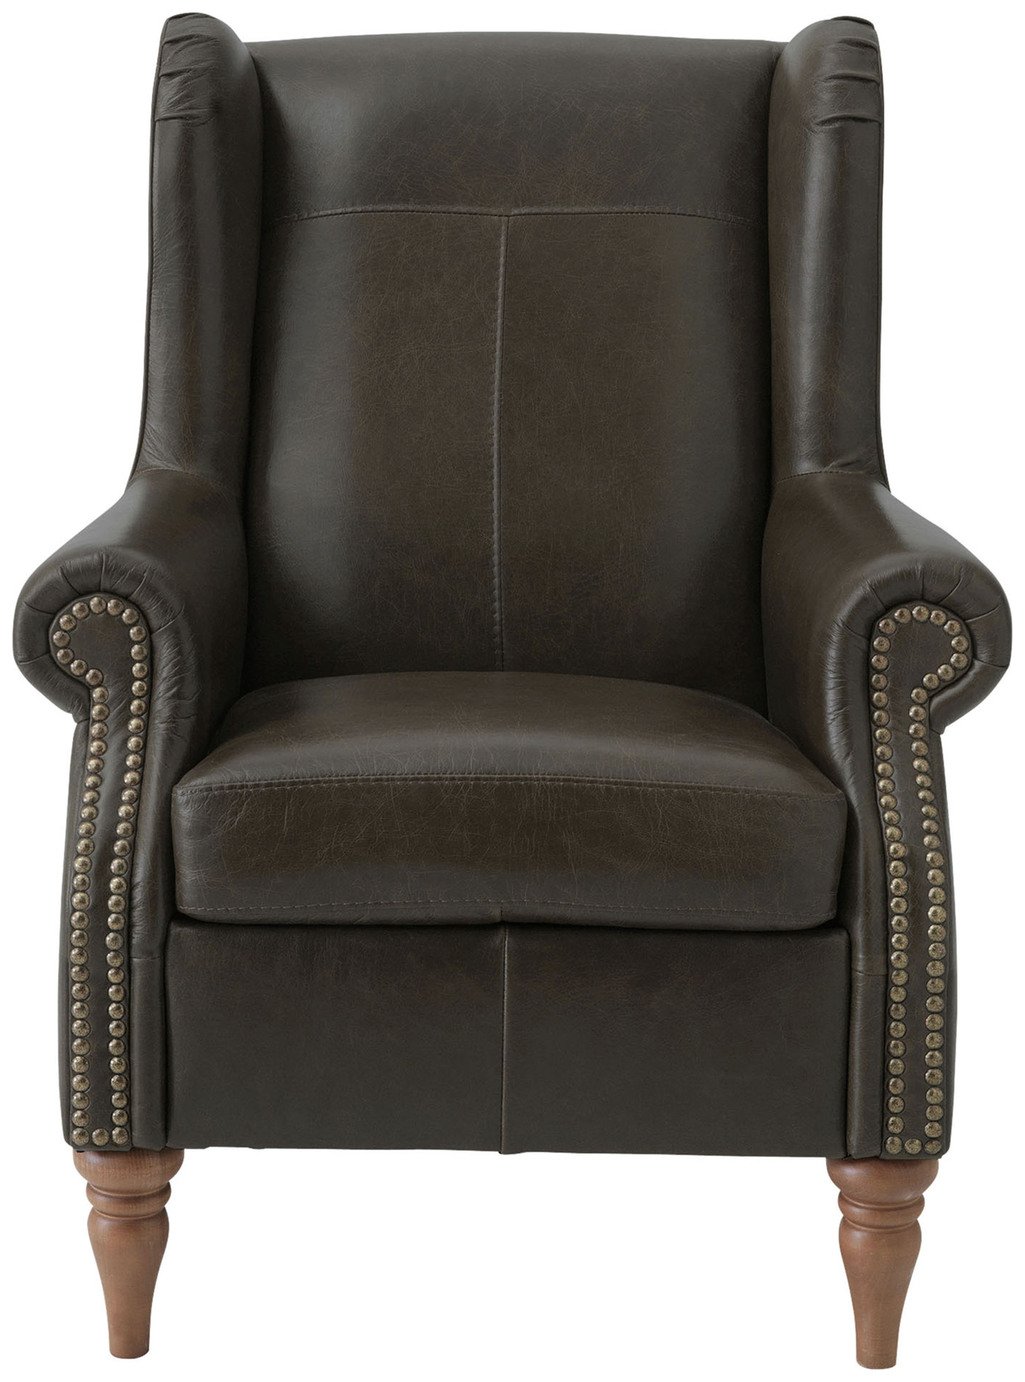 Argos Home Argyll Studded Leather High Back Chair - Dk Brown